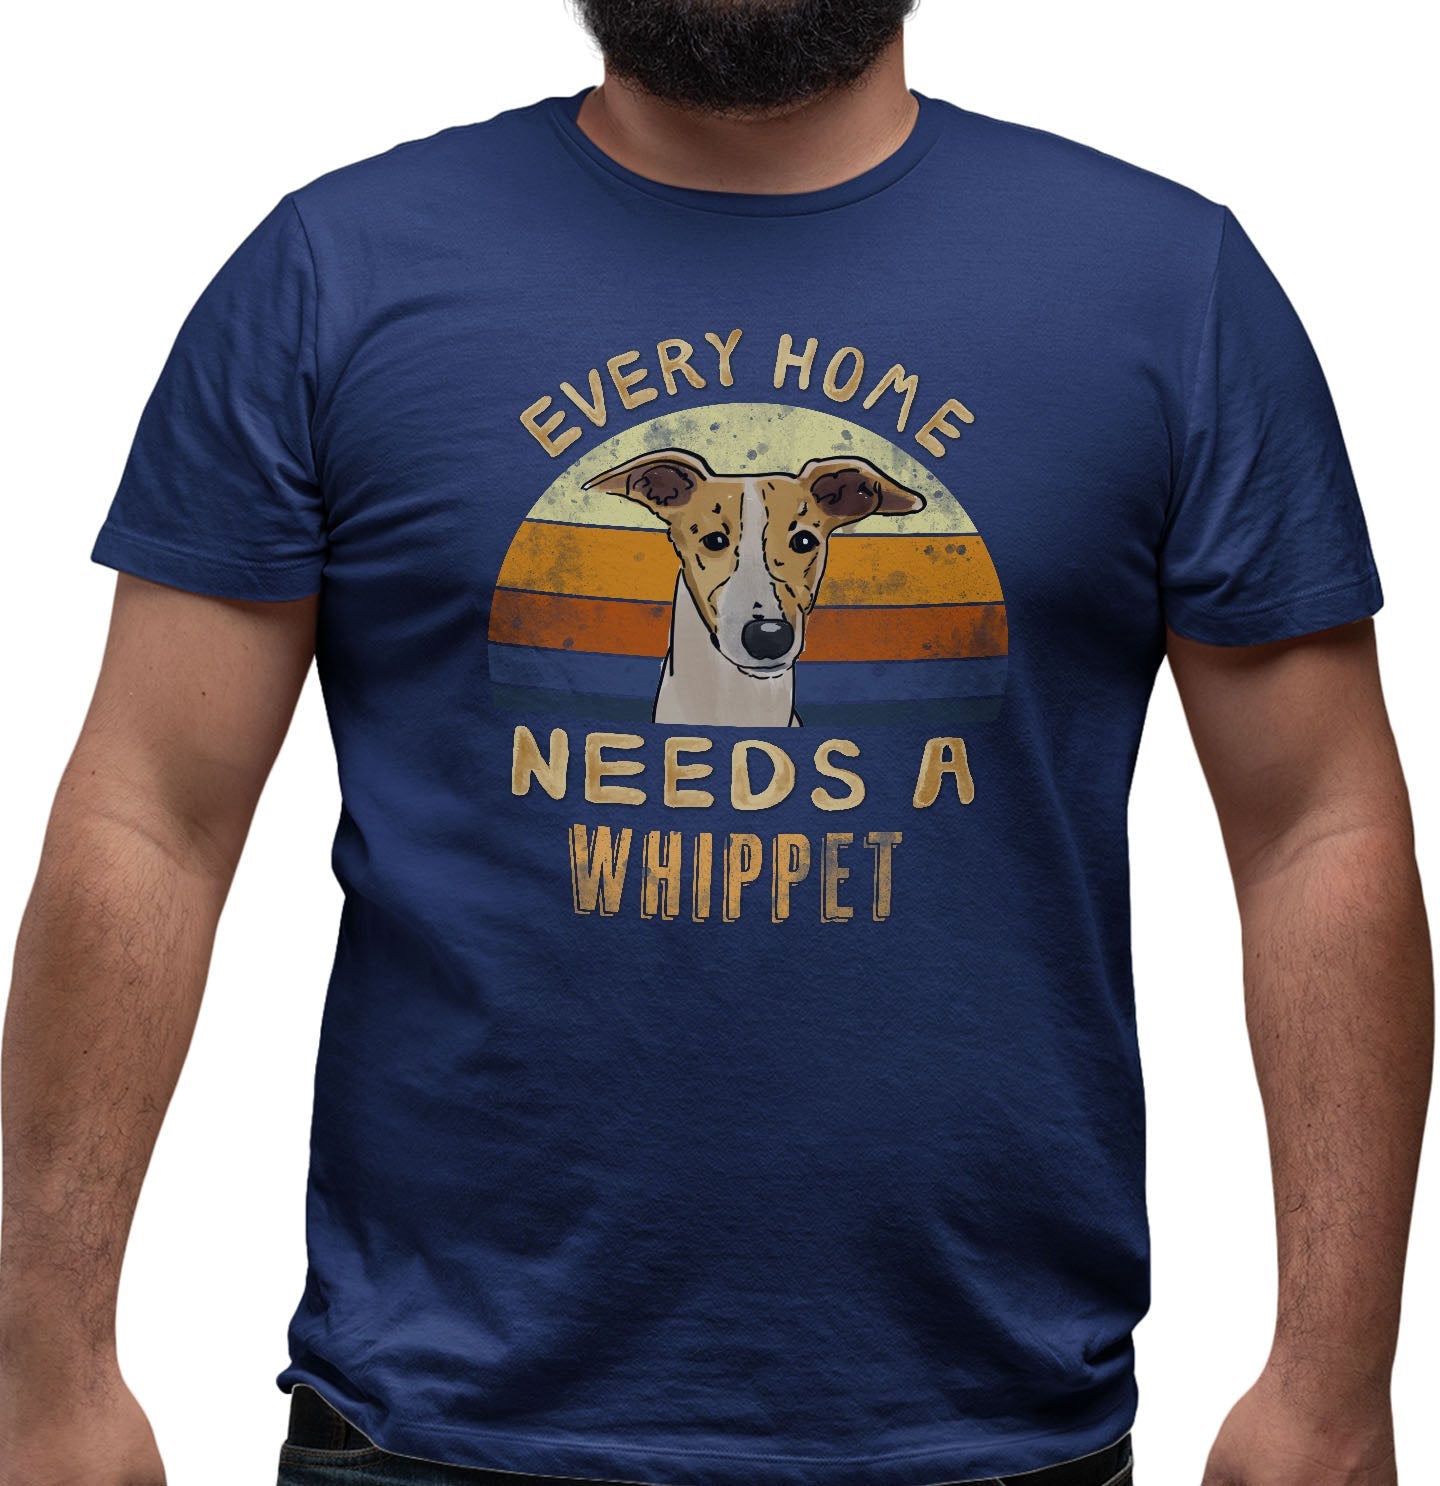 Every Home Needs a Whippet - Adult Unisex T-Shirt